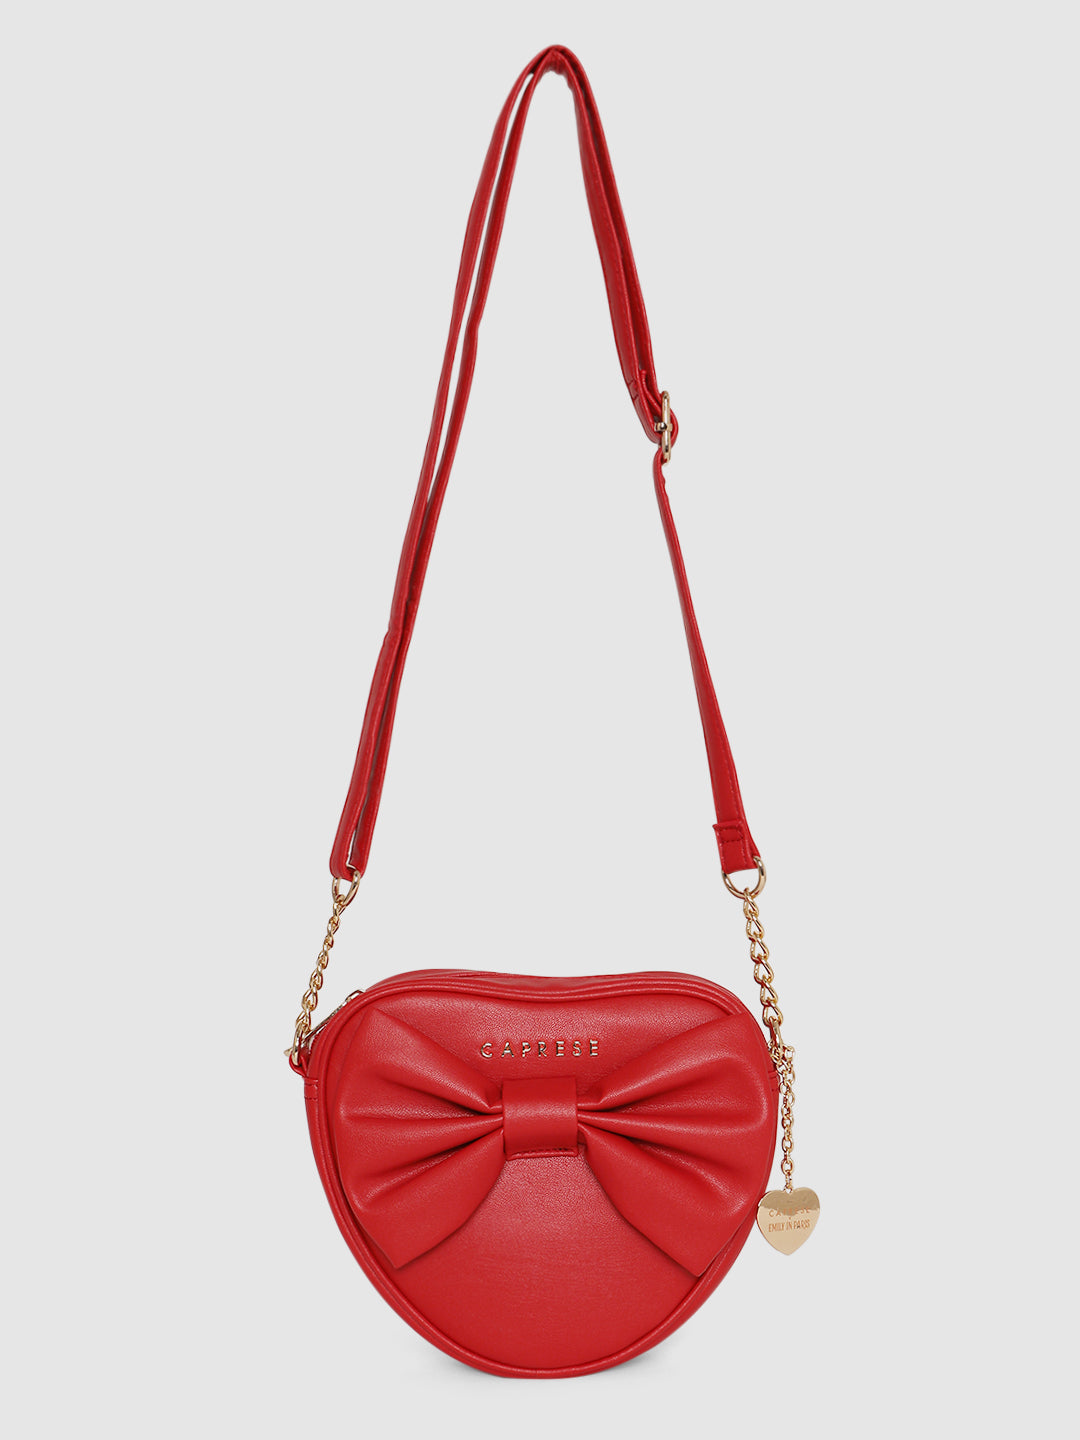 Caprese Emily in Paris Heart Shape with Bow Sling Bag